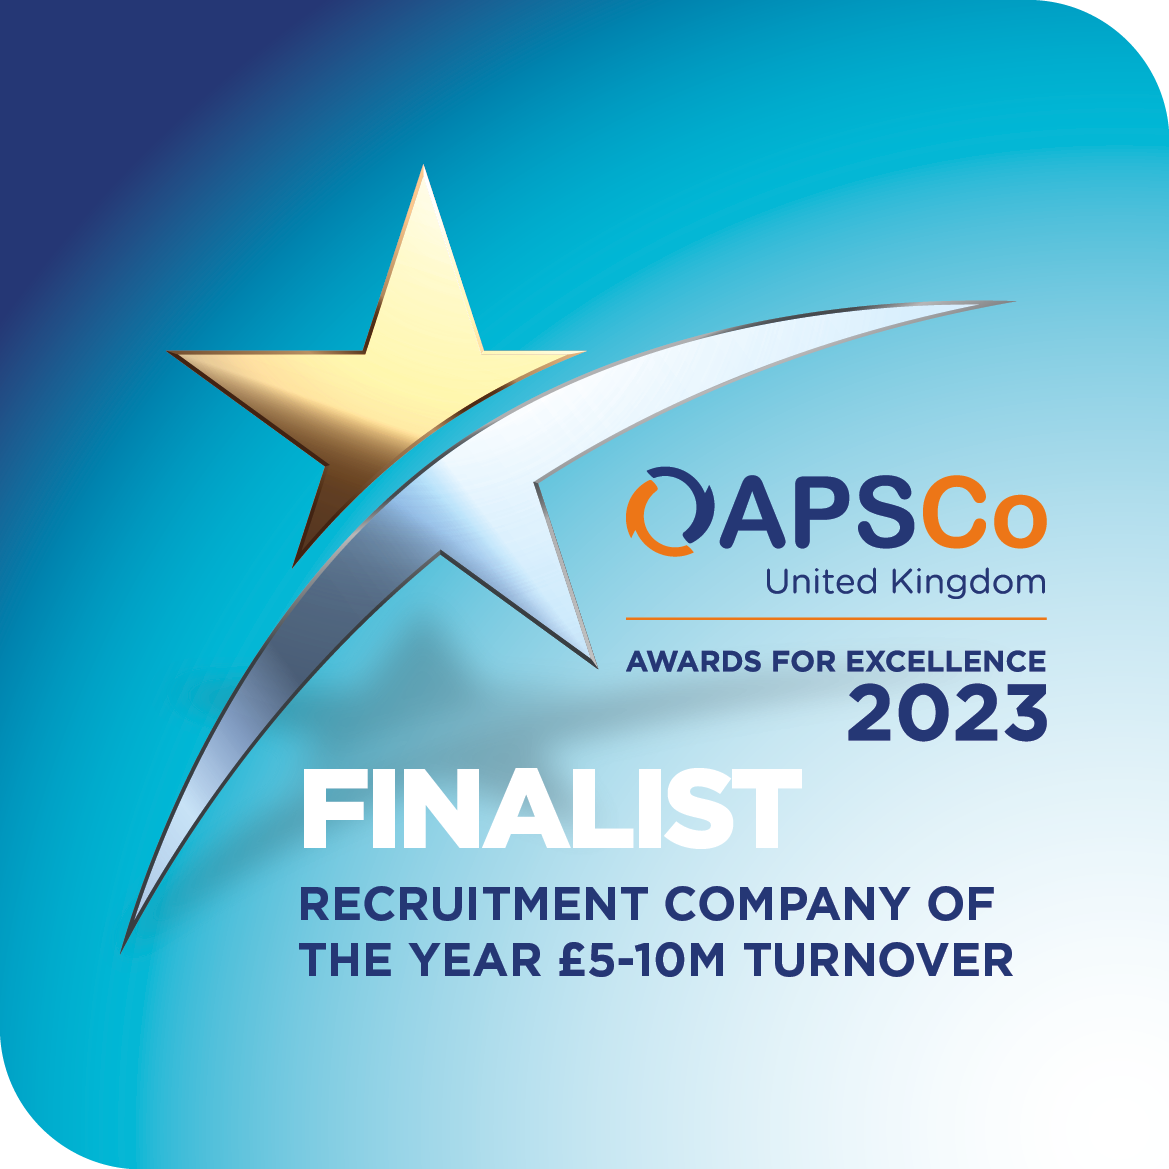 APSCo 2023 finalists for recruitment company of the year